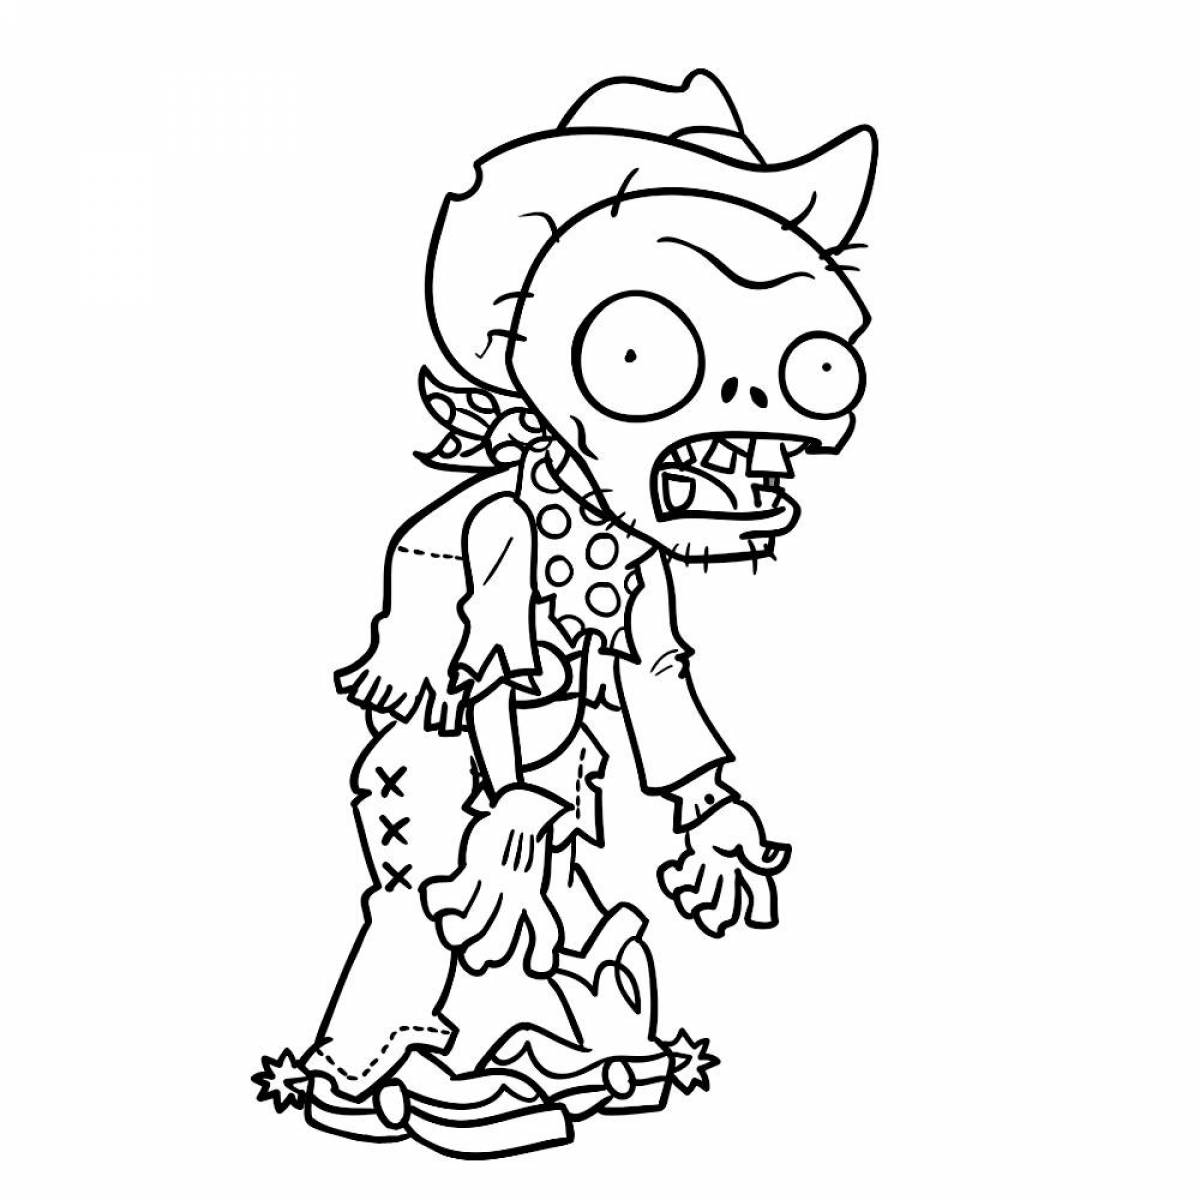 Nerving zombie coloring page